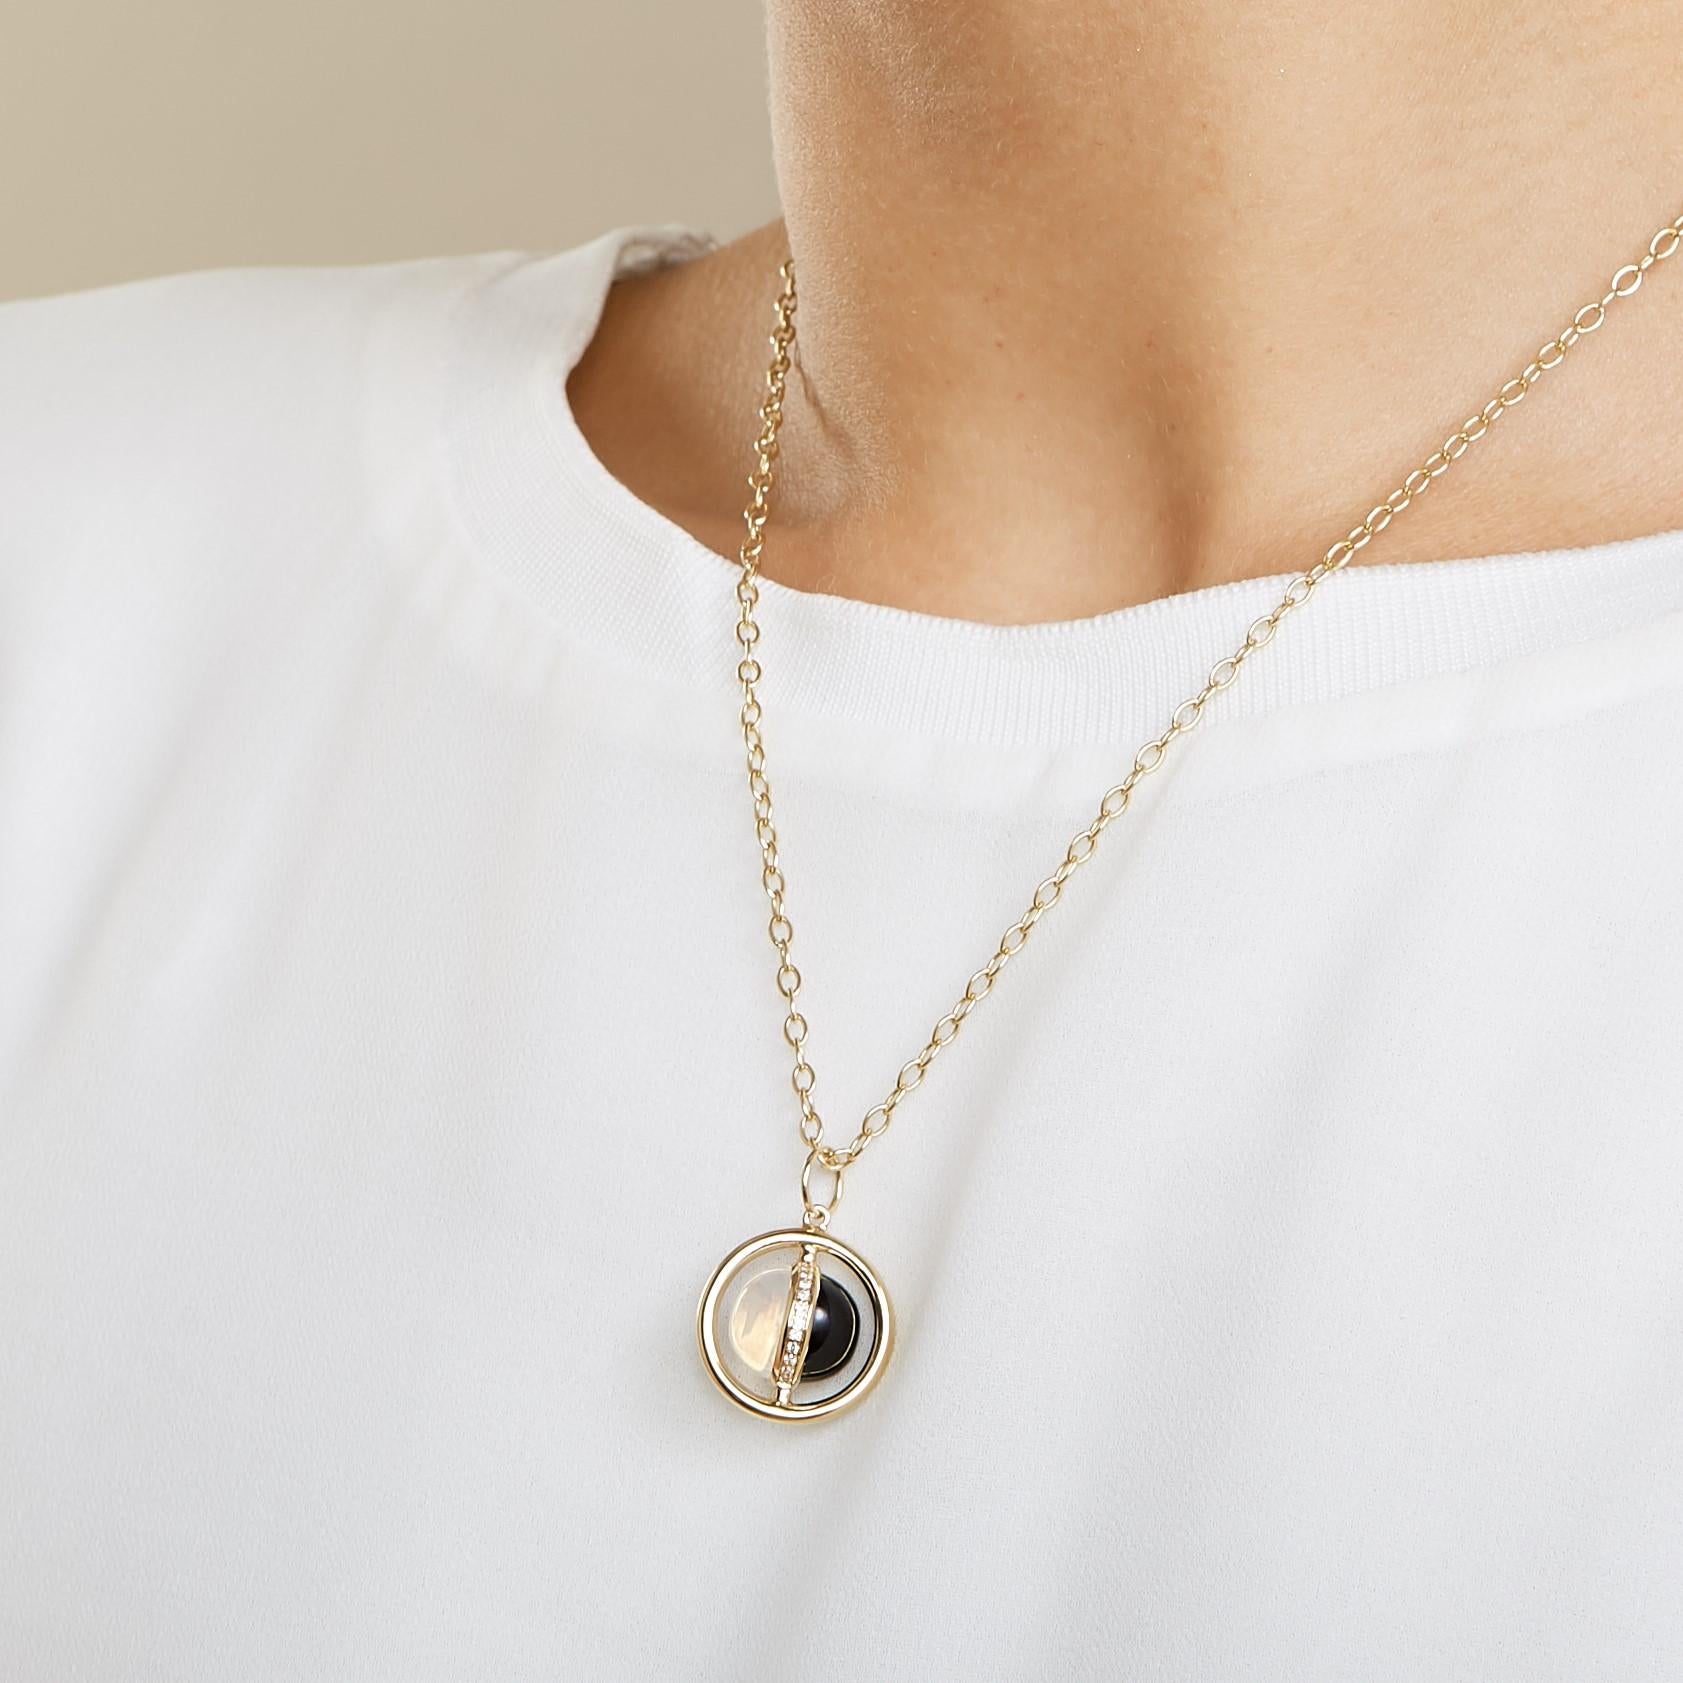 Created in 18kyg
Moon quartz 4 cts apprx
Black onyx 4 cts approx
Diamonds 0.14 ct approx
Day & night reversible pendant
Chain sold separately

Crafted with 18-karat yellow gold, this moon quartz and black onyx pendant captivates with its 4-carat and